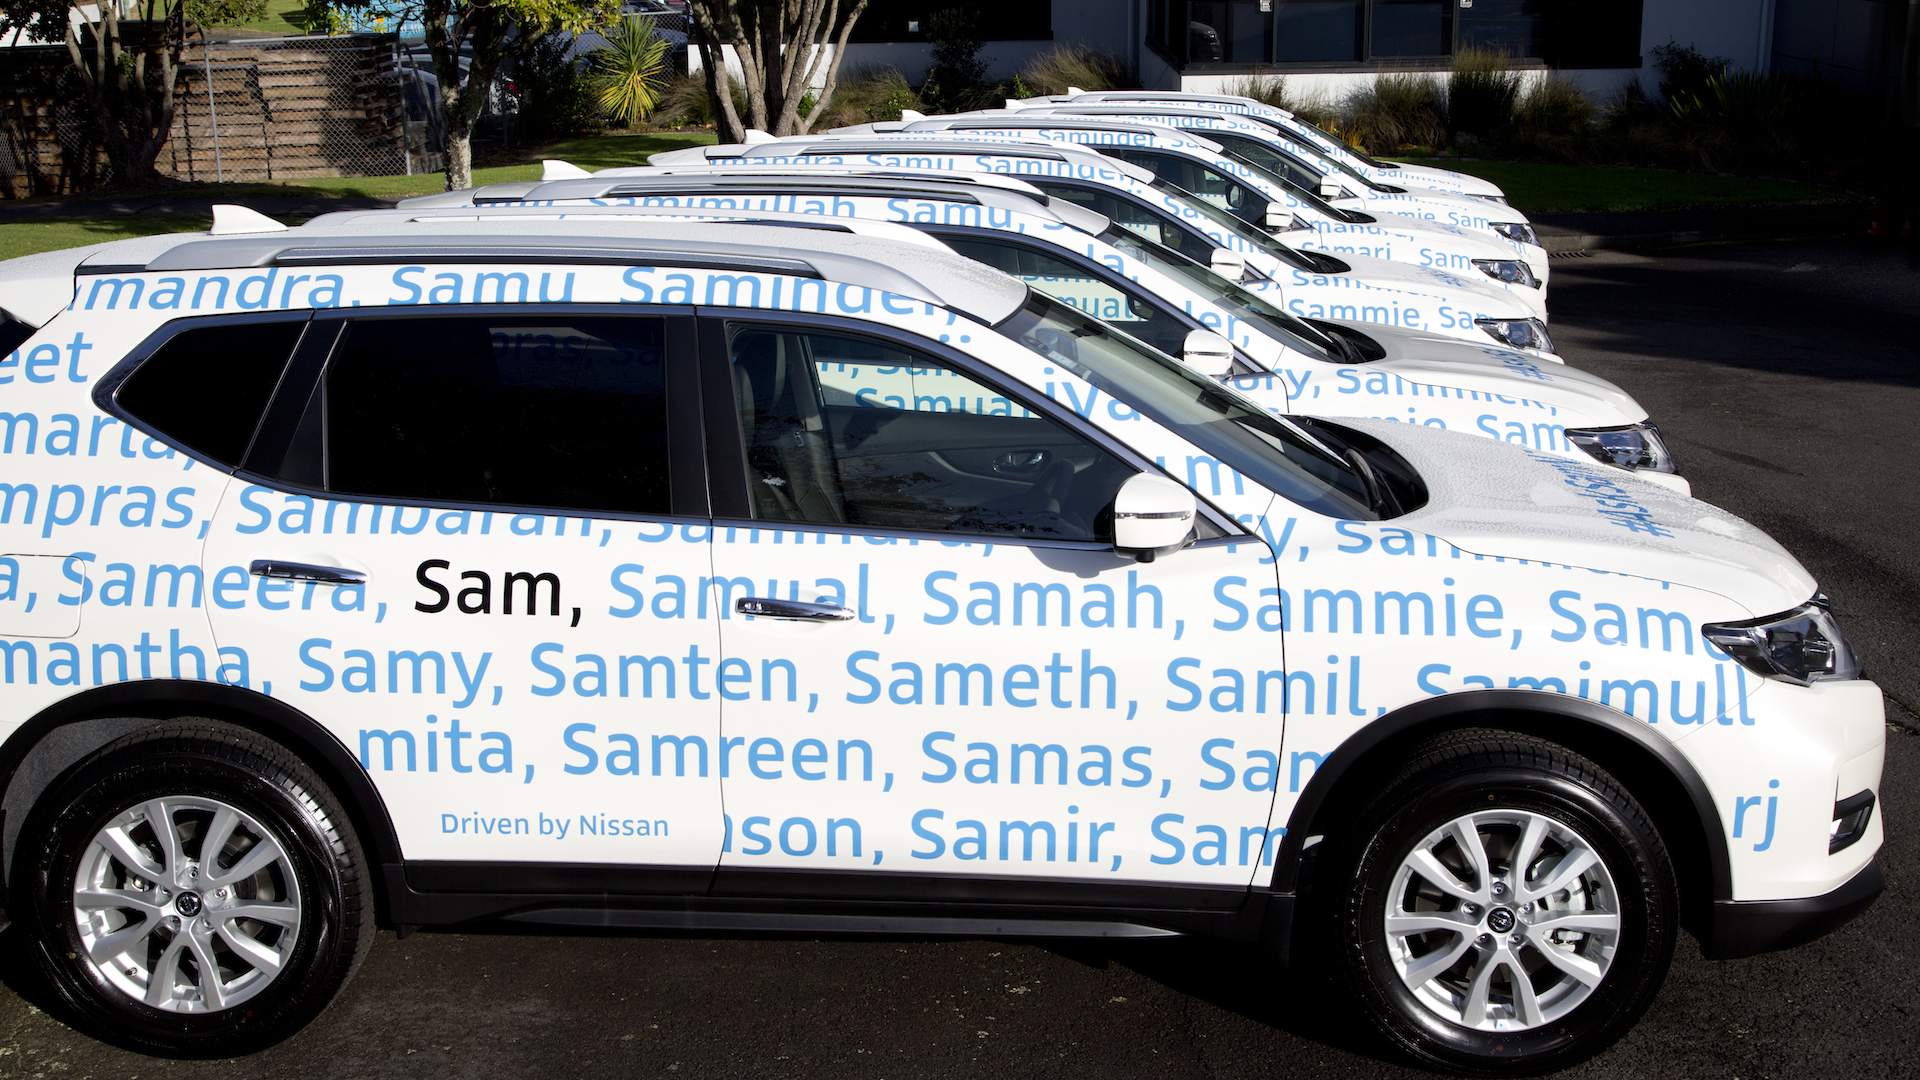 Uber Is Giving Anyone With the Name 'Sam' Free Rides For a Week